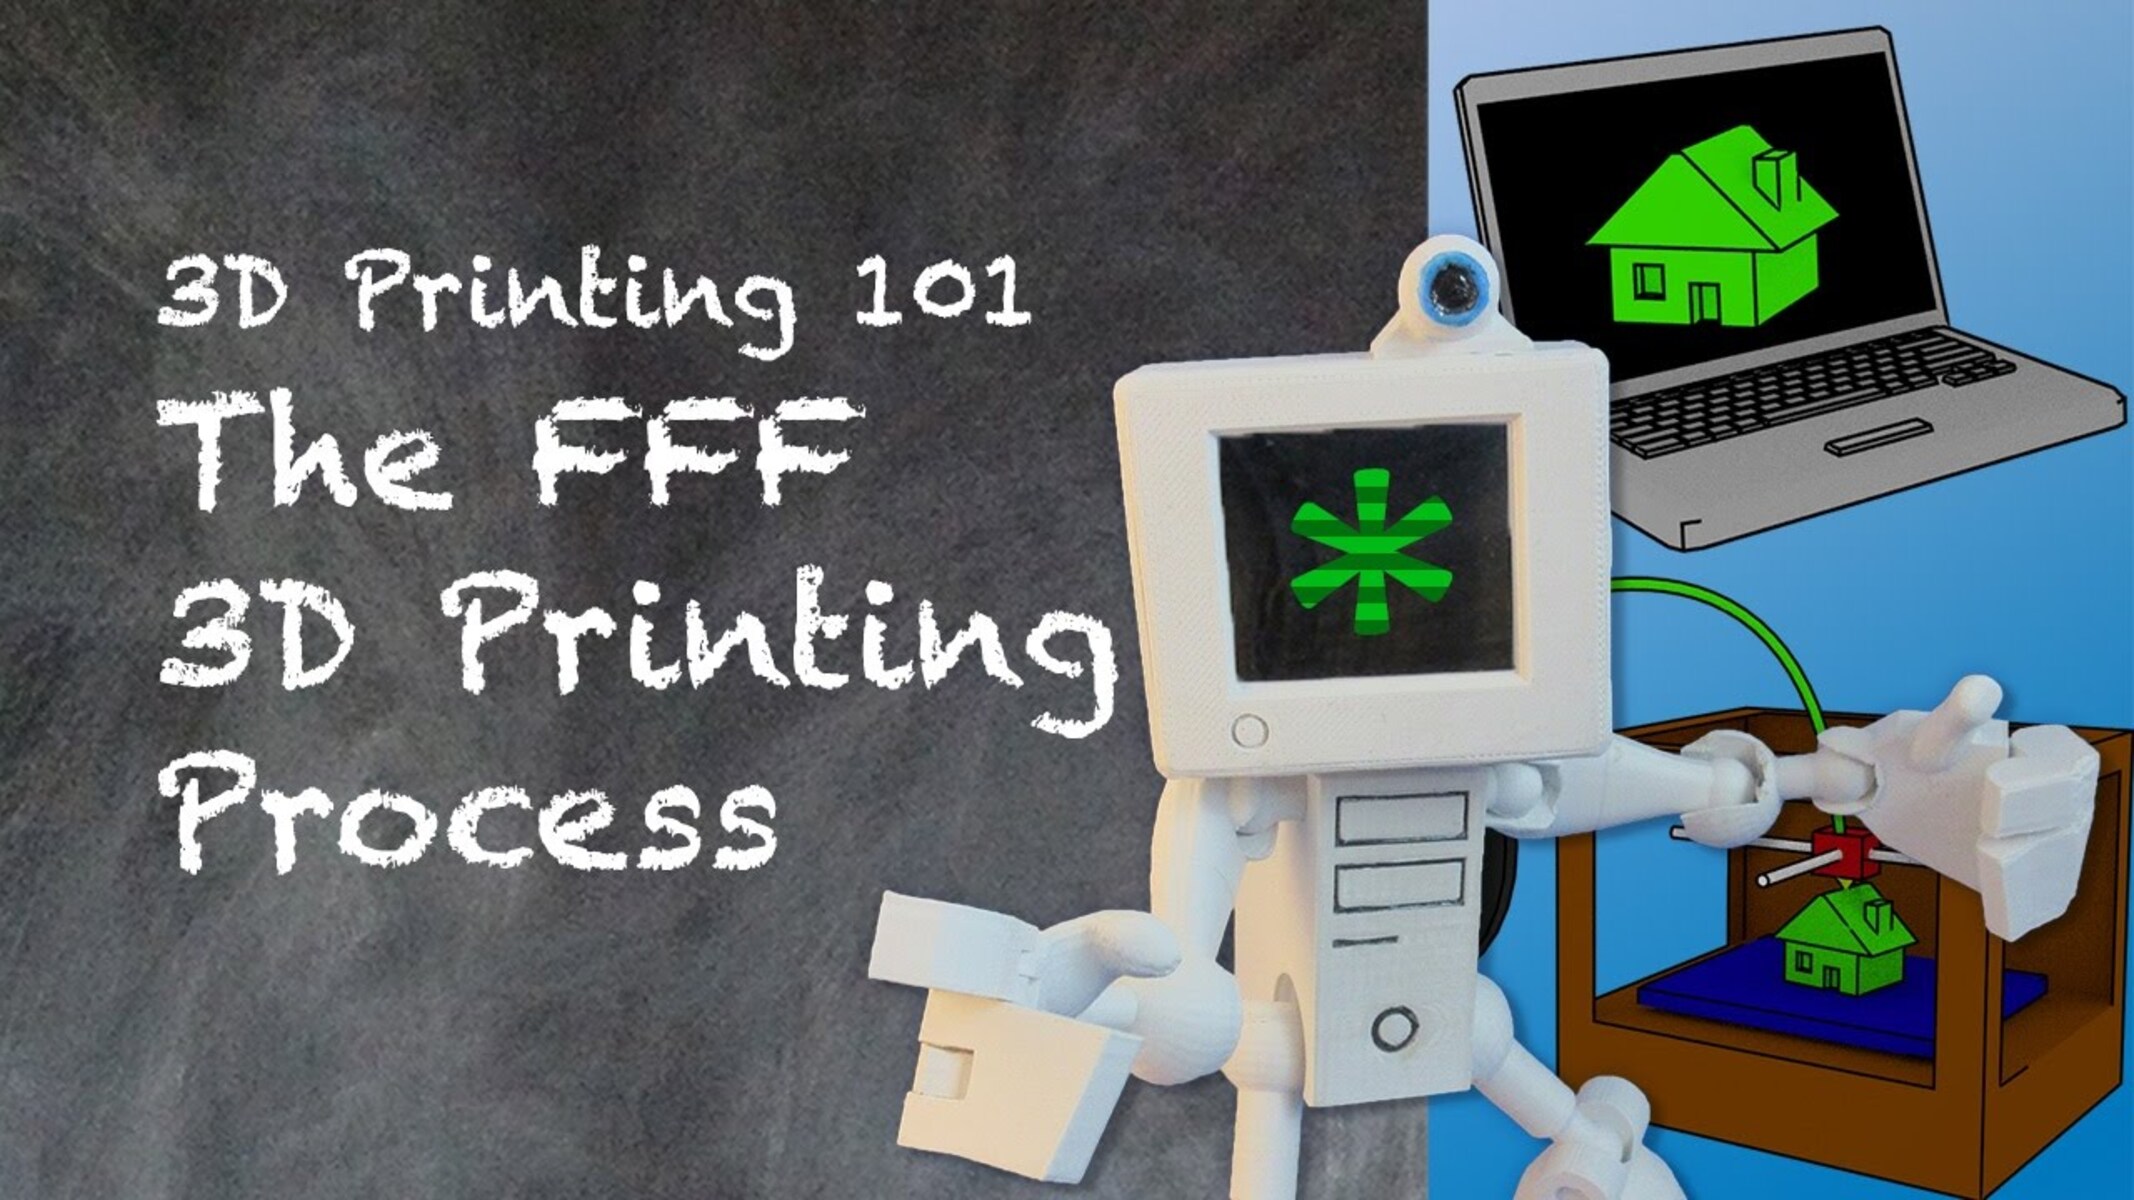 What Does Fff Mean In 3D Printing